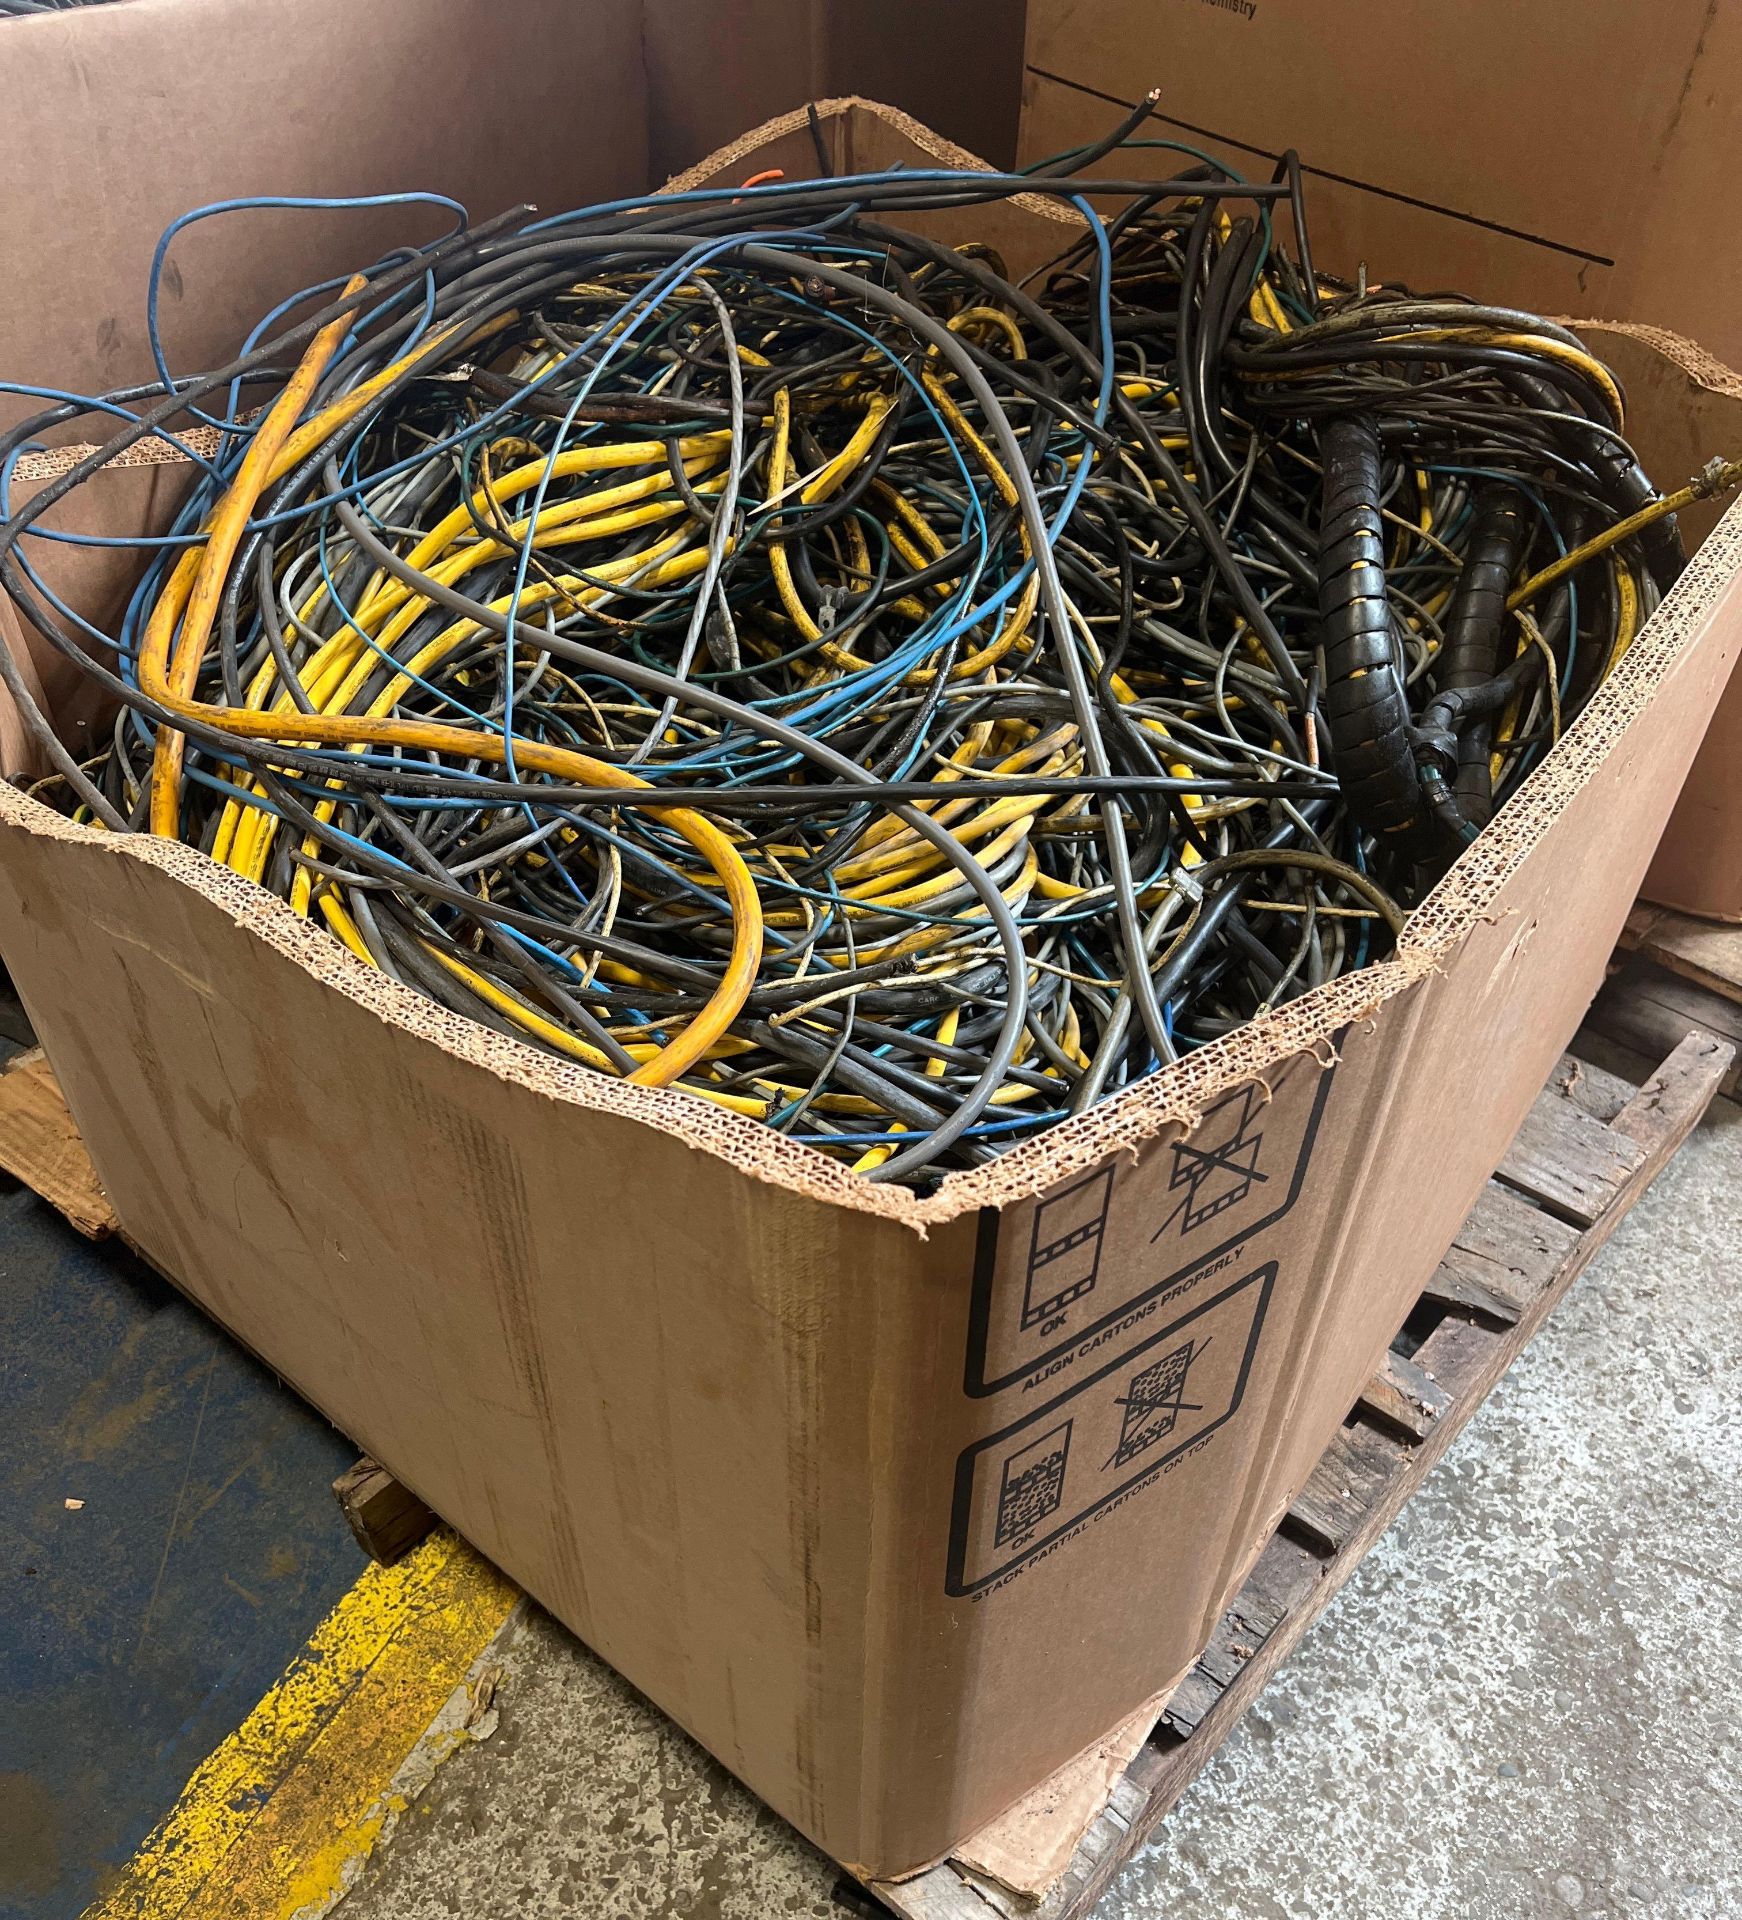 Scrap Wire (Insulated) 375 Lbs. (Includes Tare Weight)